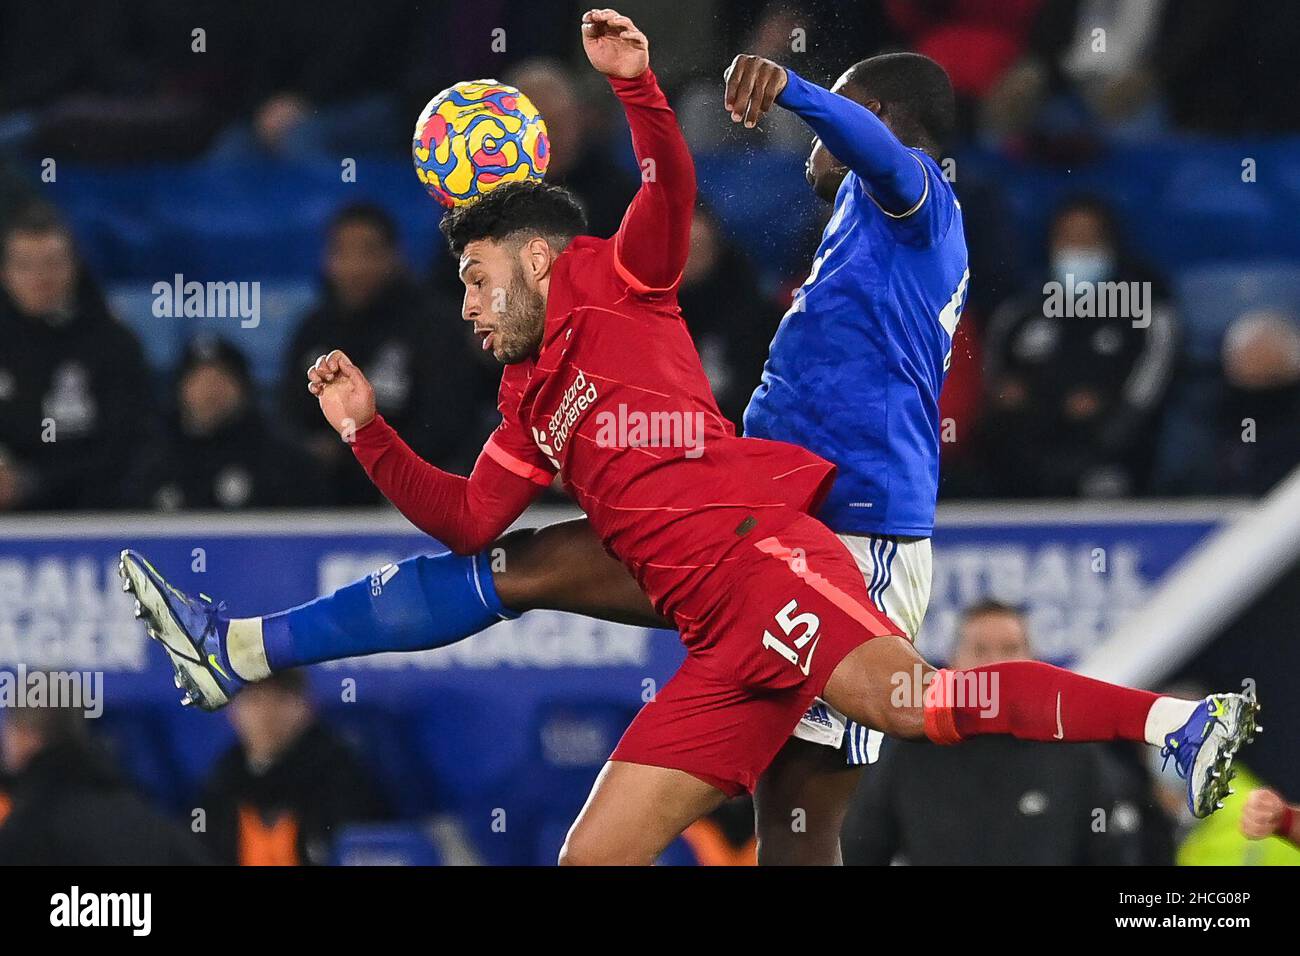 Alex Oxlade-Chamberlain #15 of Liverpool and Boubakary Soumare #42 of Leicester City battles for the ball in, on 12/28/2021. (Photo by Craig Thomas/News Images/Sipa USA) Credit: Sipa USA/Alamy Live News Stock Photo